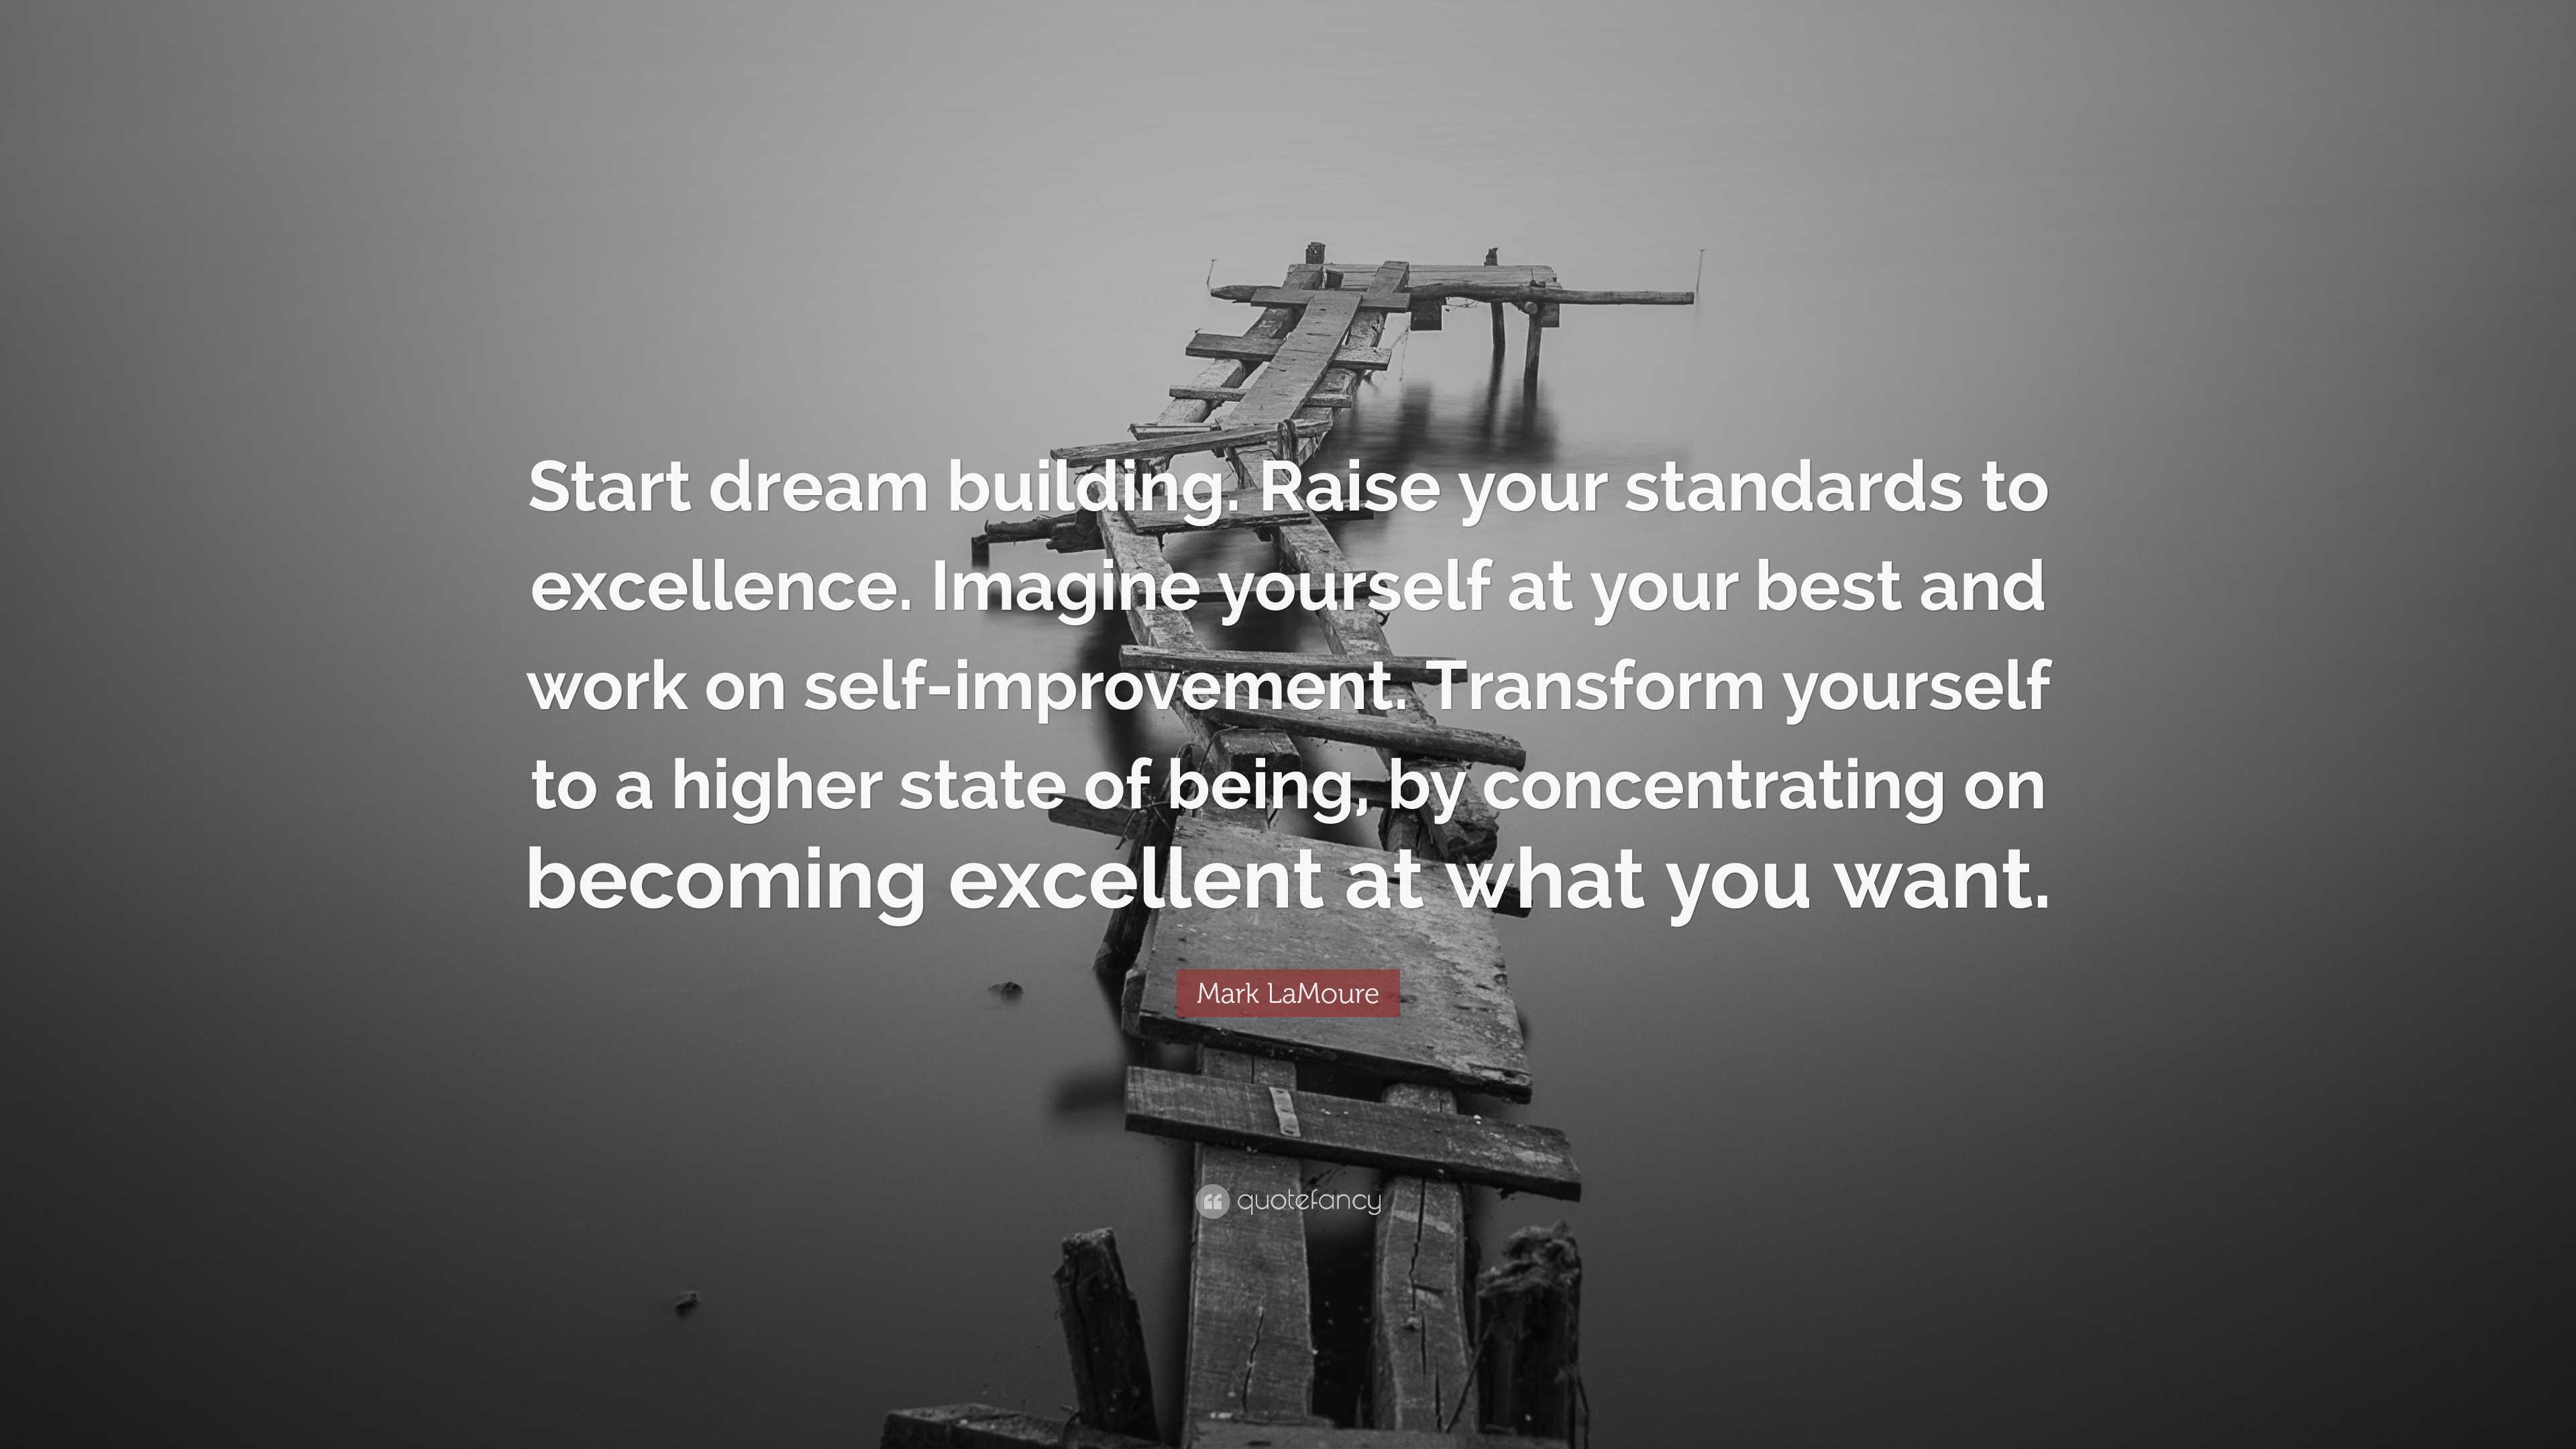 Mark LaMoure Quote: “Start dream building. Raise your standards to